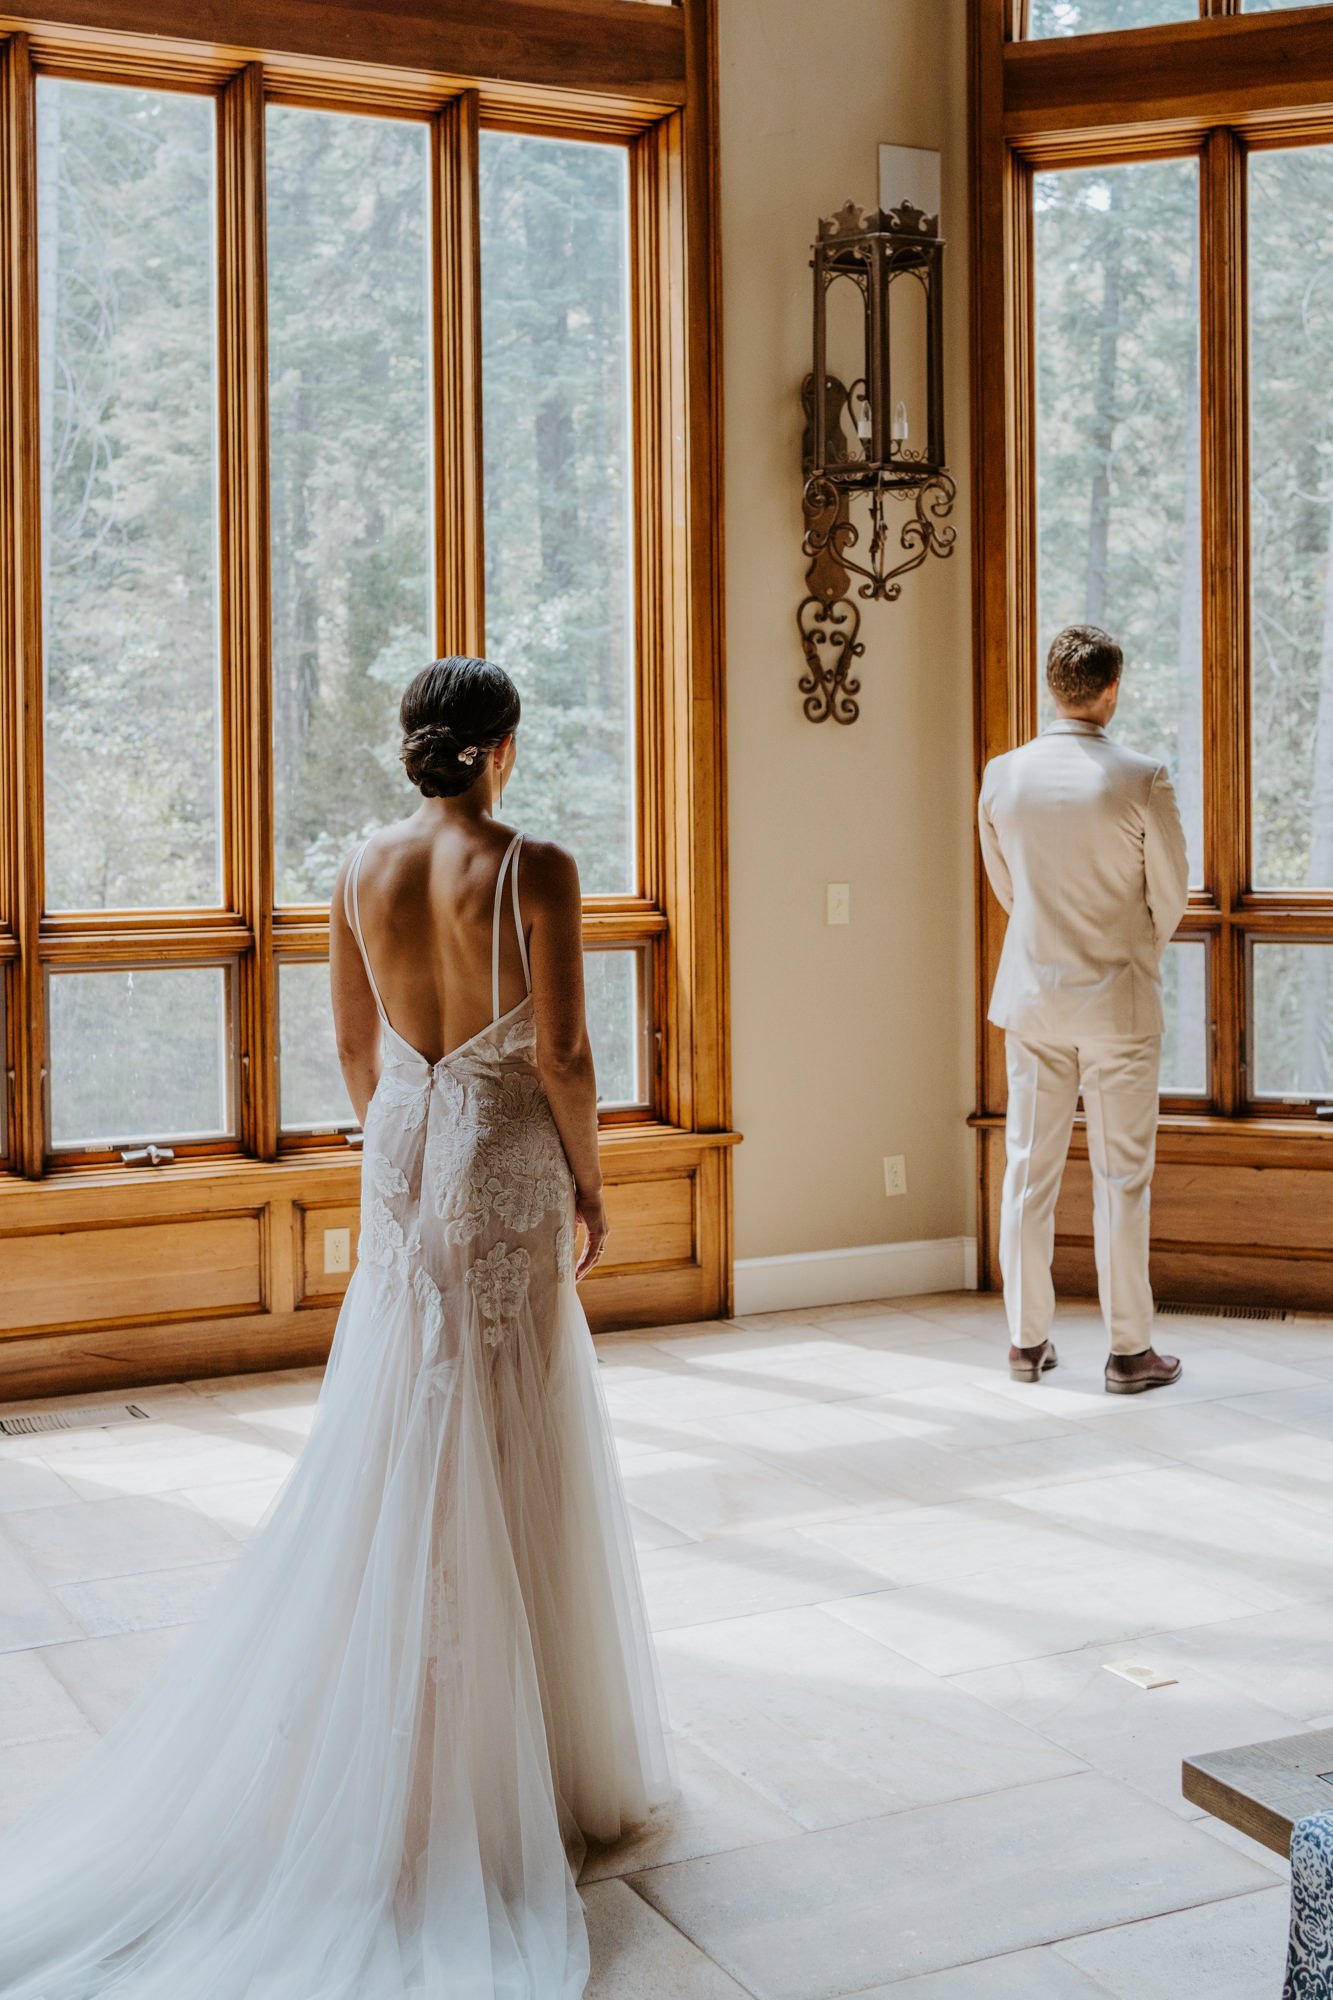 Bride and groom first look at Castle in the Forest in lake arrowhead, airbnb wedding, Photo by Tida Svy